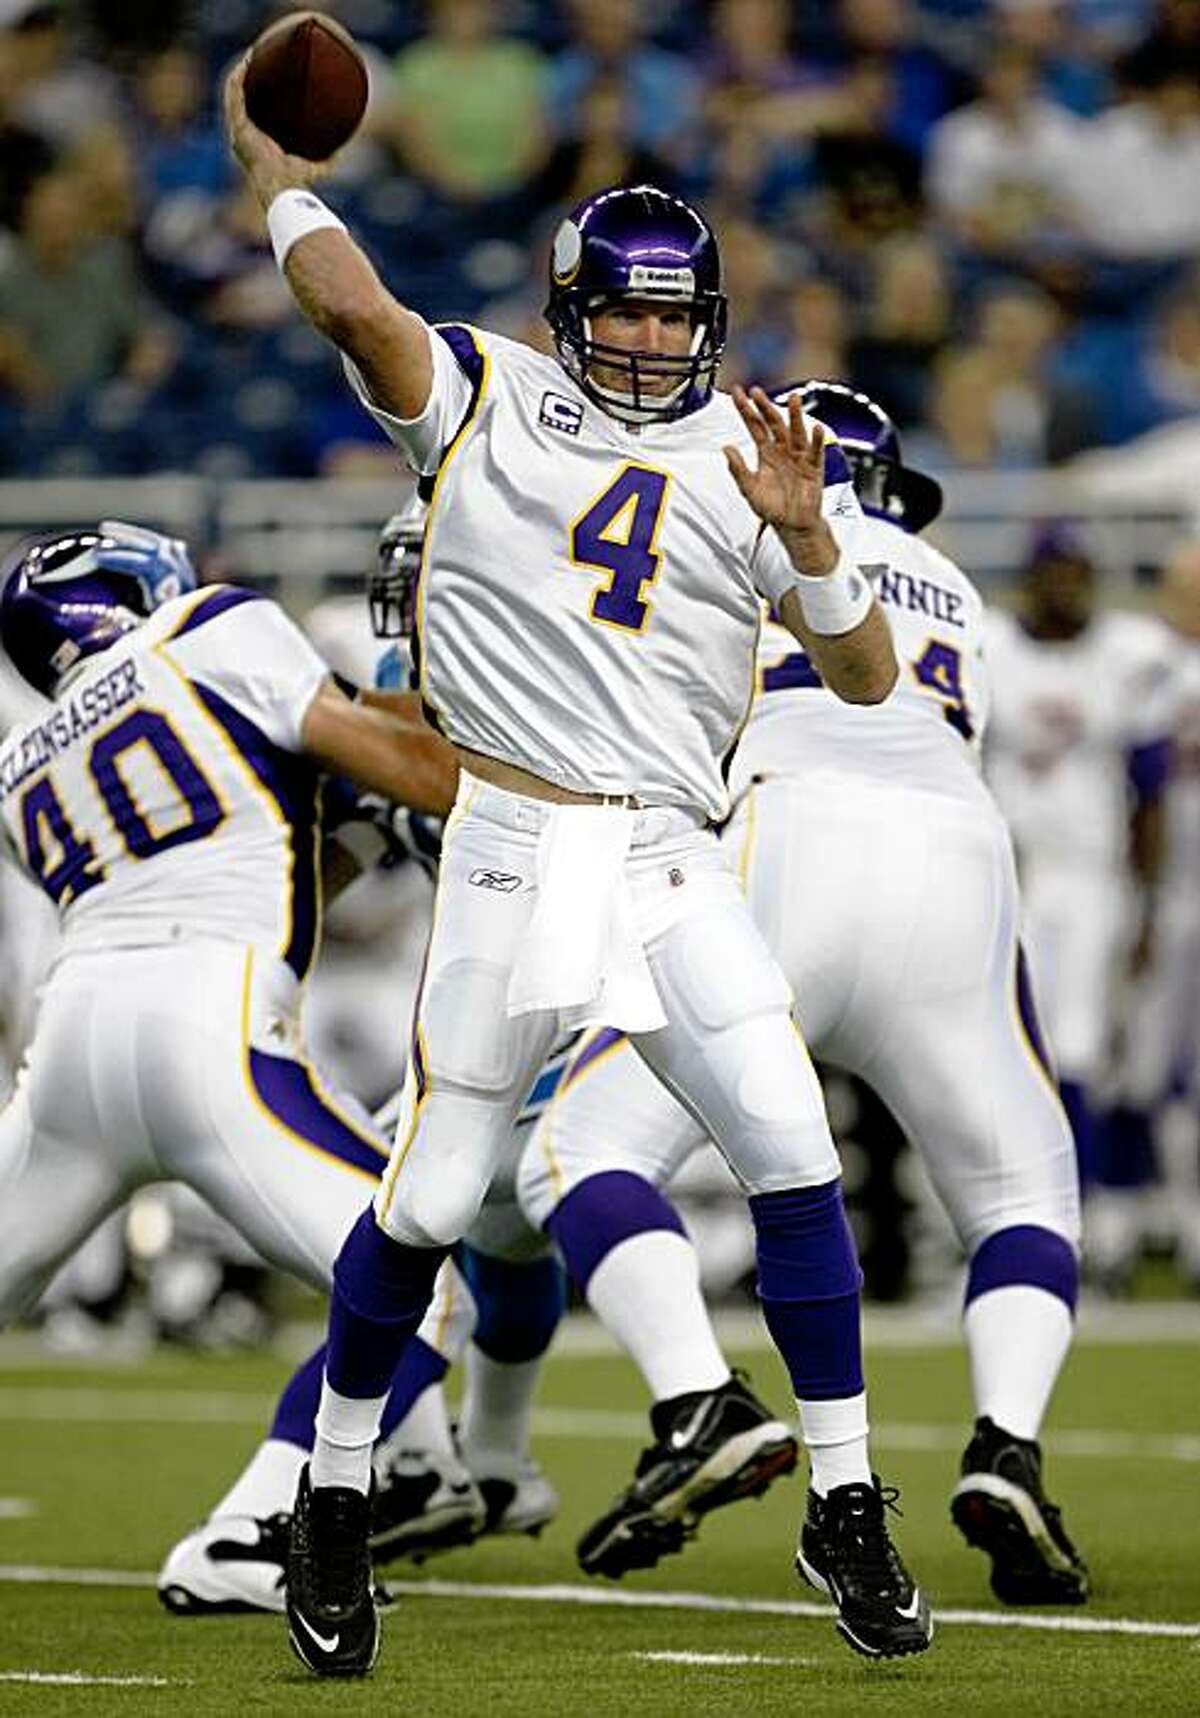 DETROIT - SEPTEMBER 20: Quarterback Brett Favre #4 of the Minnesota Vikings throws a pass against the Detroit Lions at Ford Field on September 20, 2009 in Detroit, Michigan. (Photo by Stephen Dunn/Getty Images)